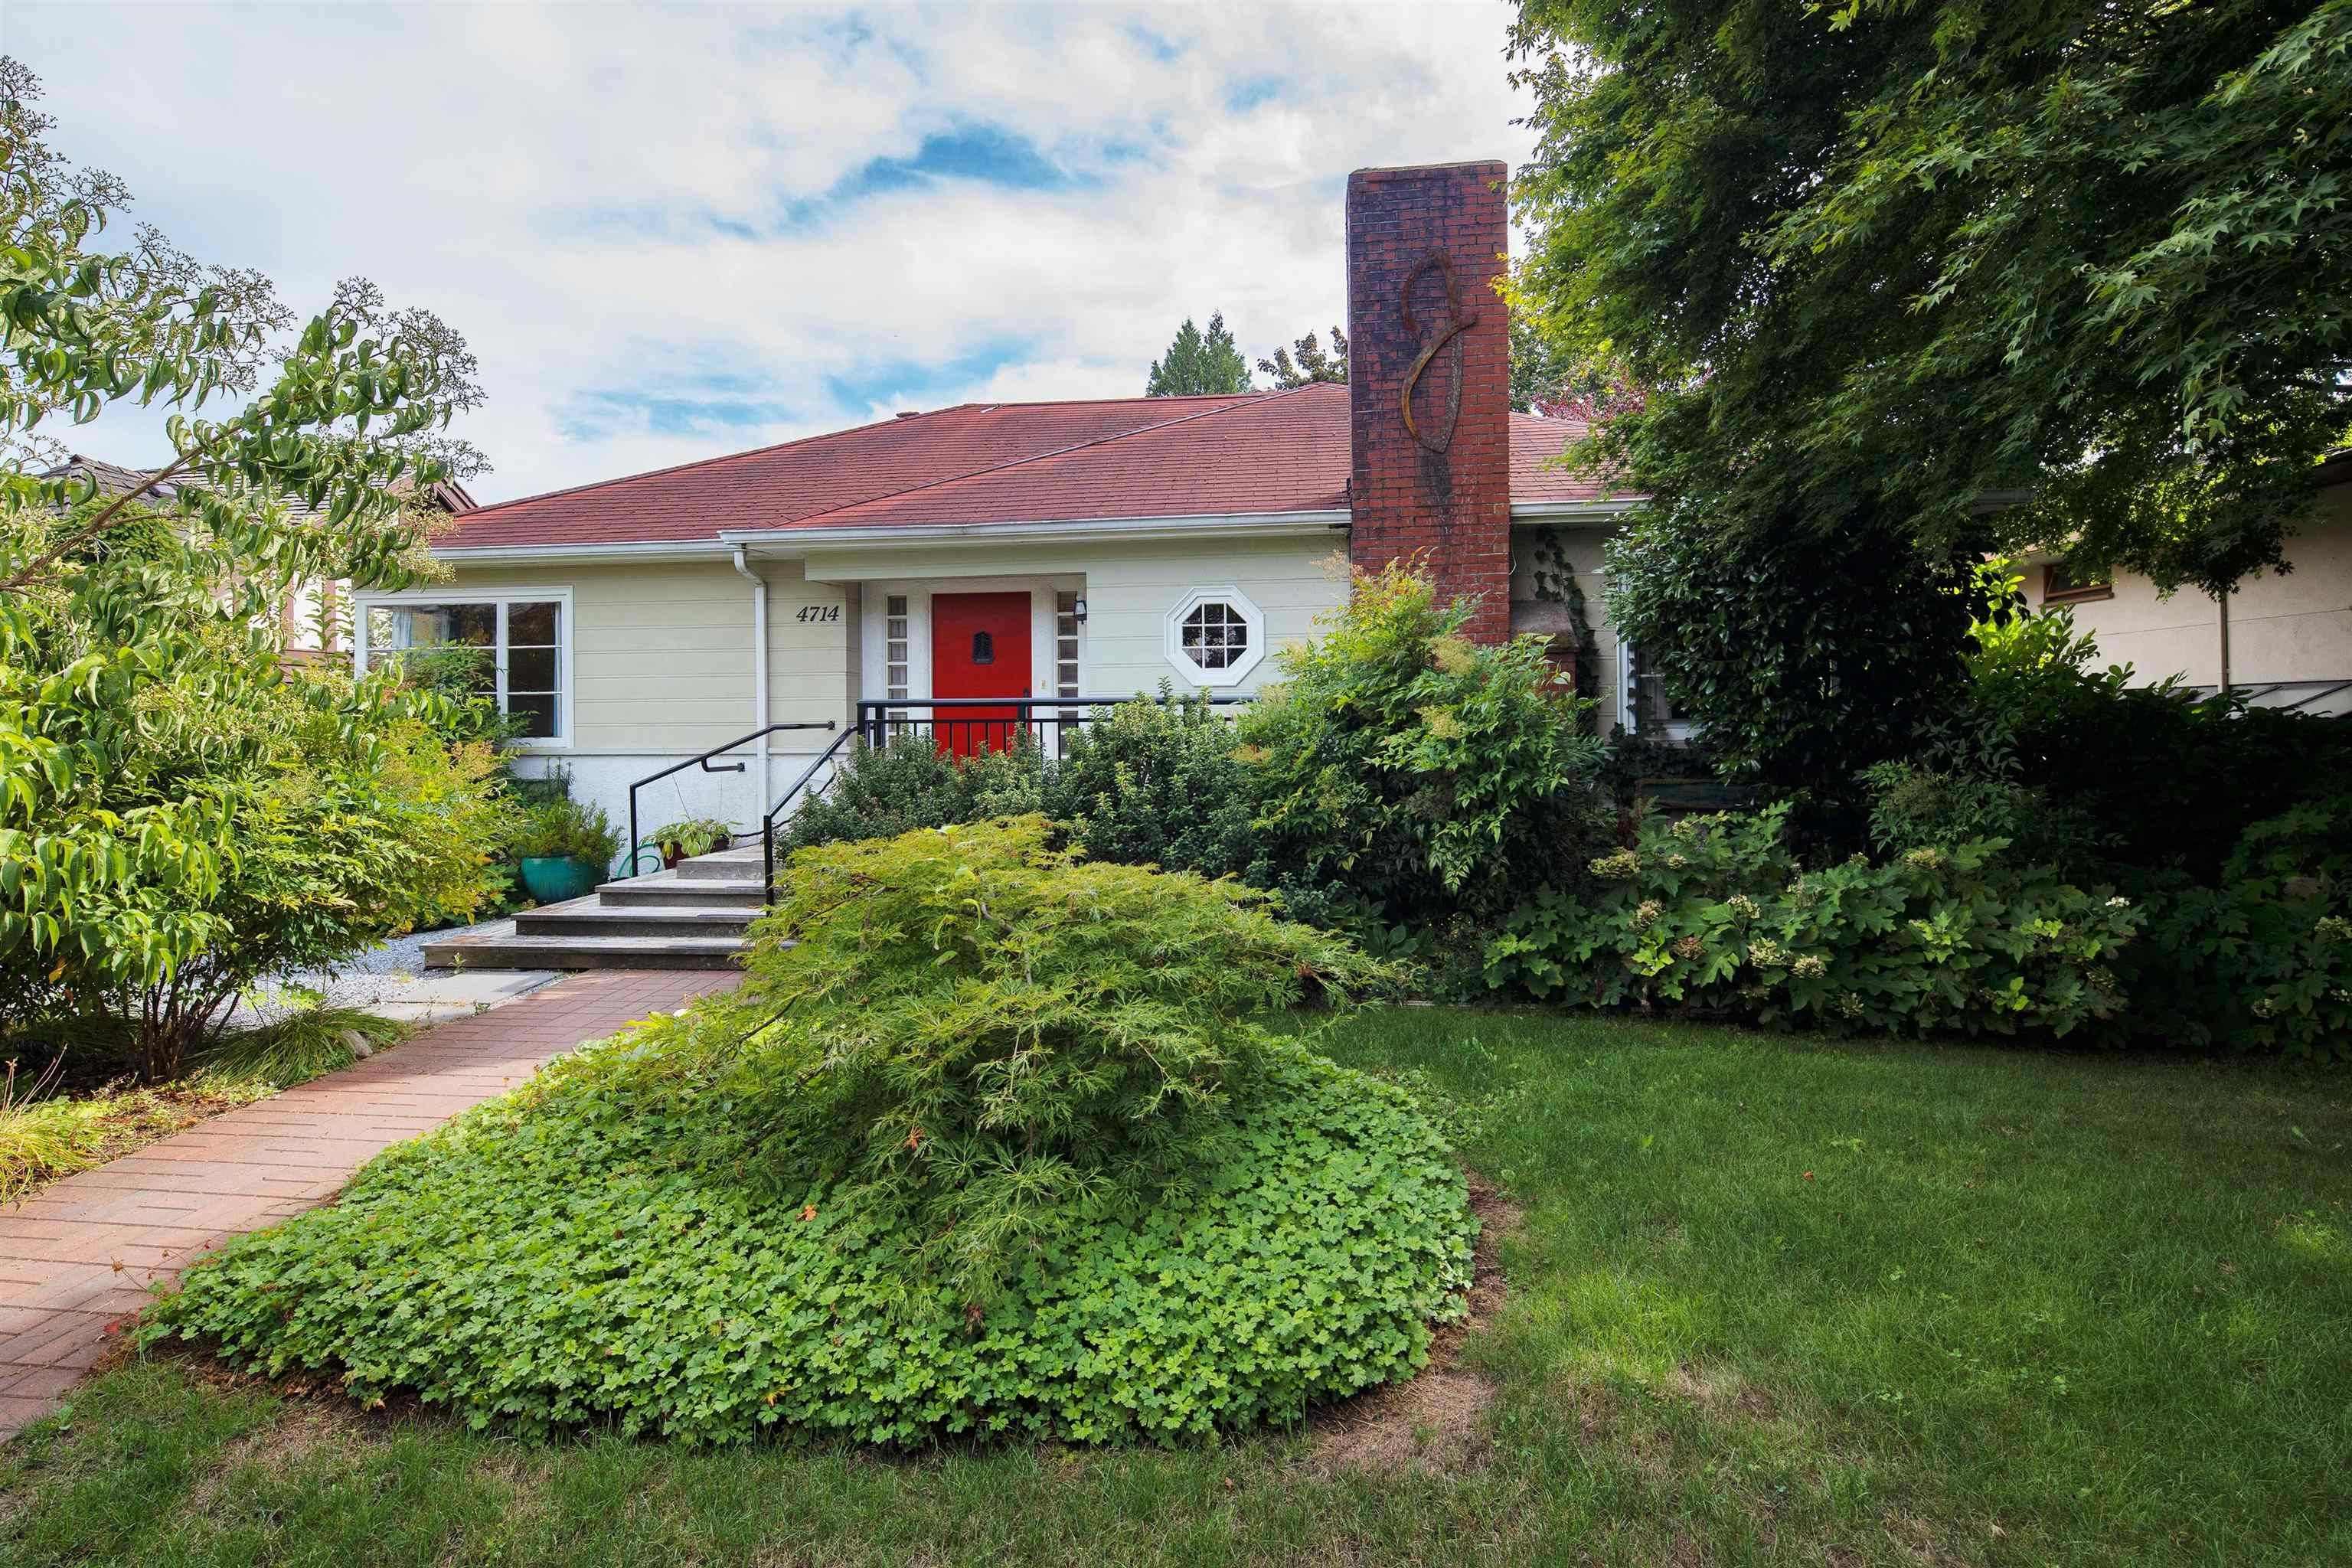 New property listed in University VW, Vancouver West, 4714 7TH AVE W in Vancouver, $3,198,000 